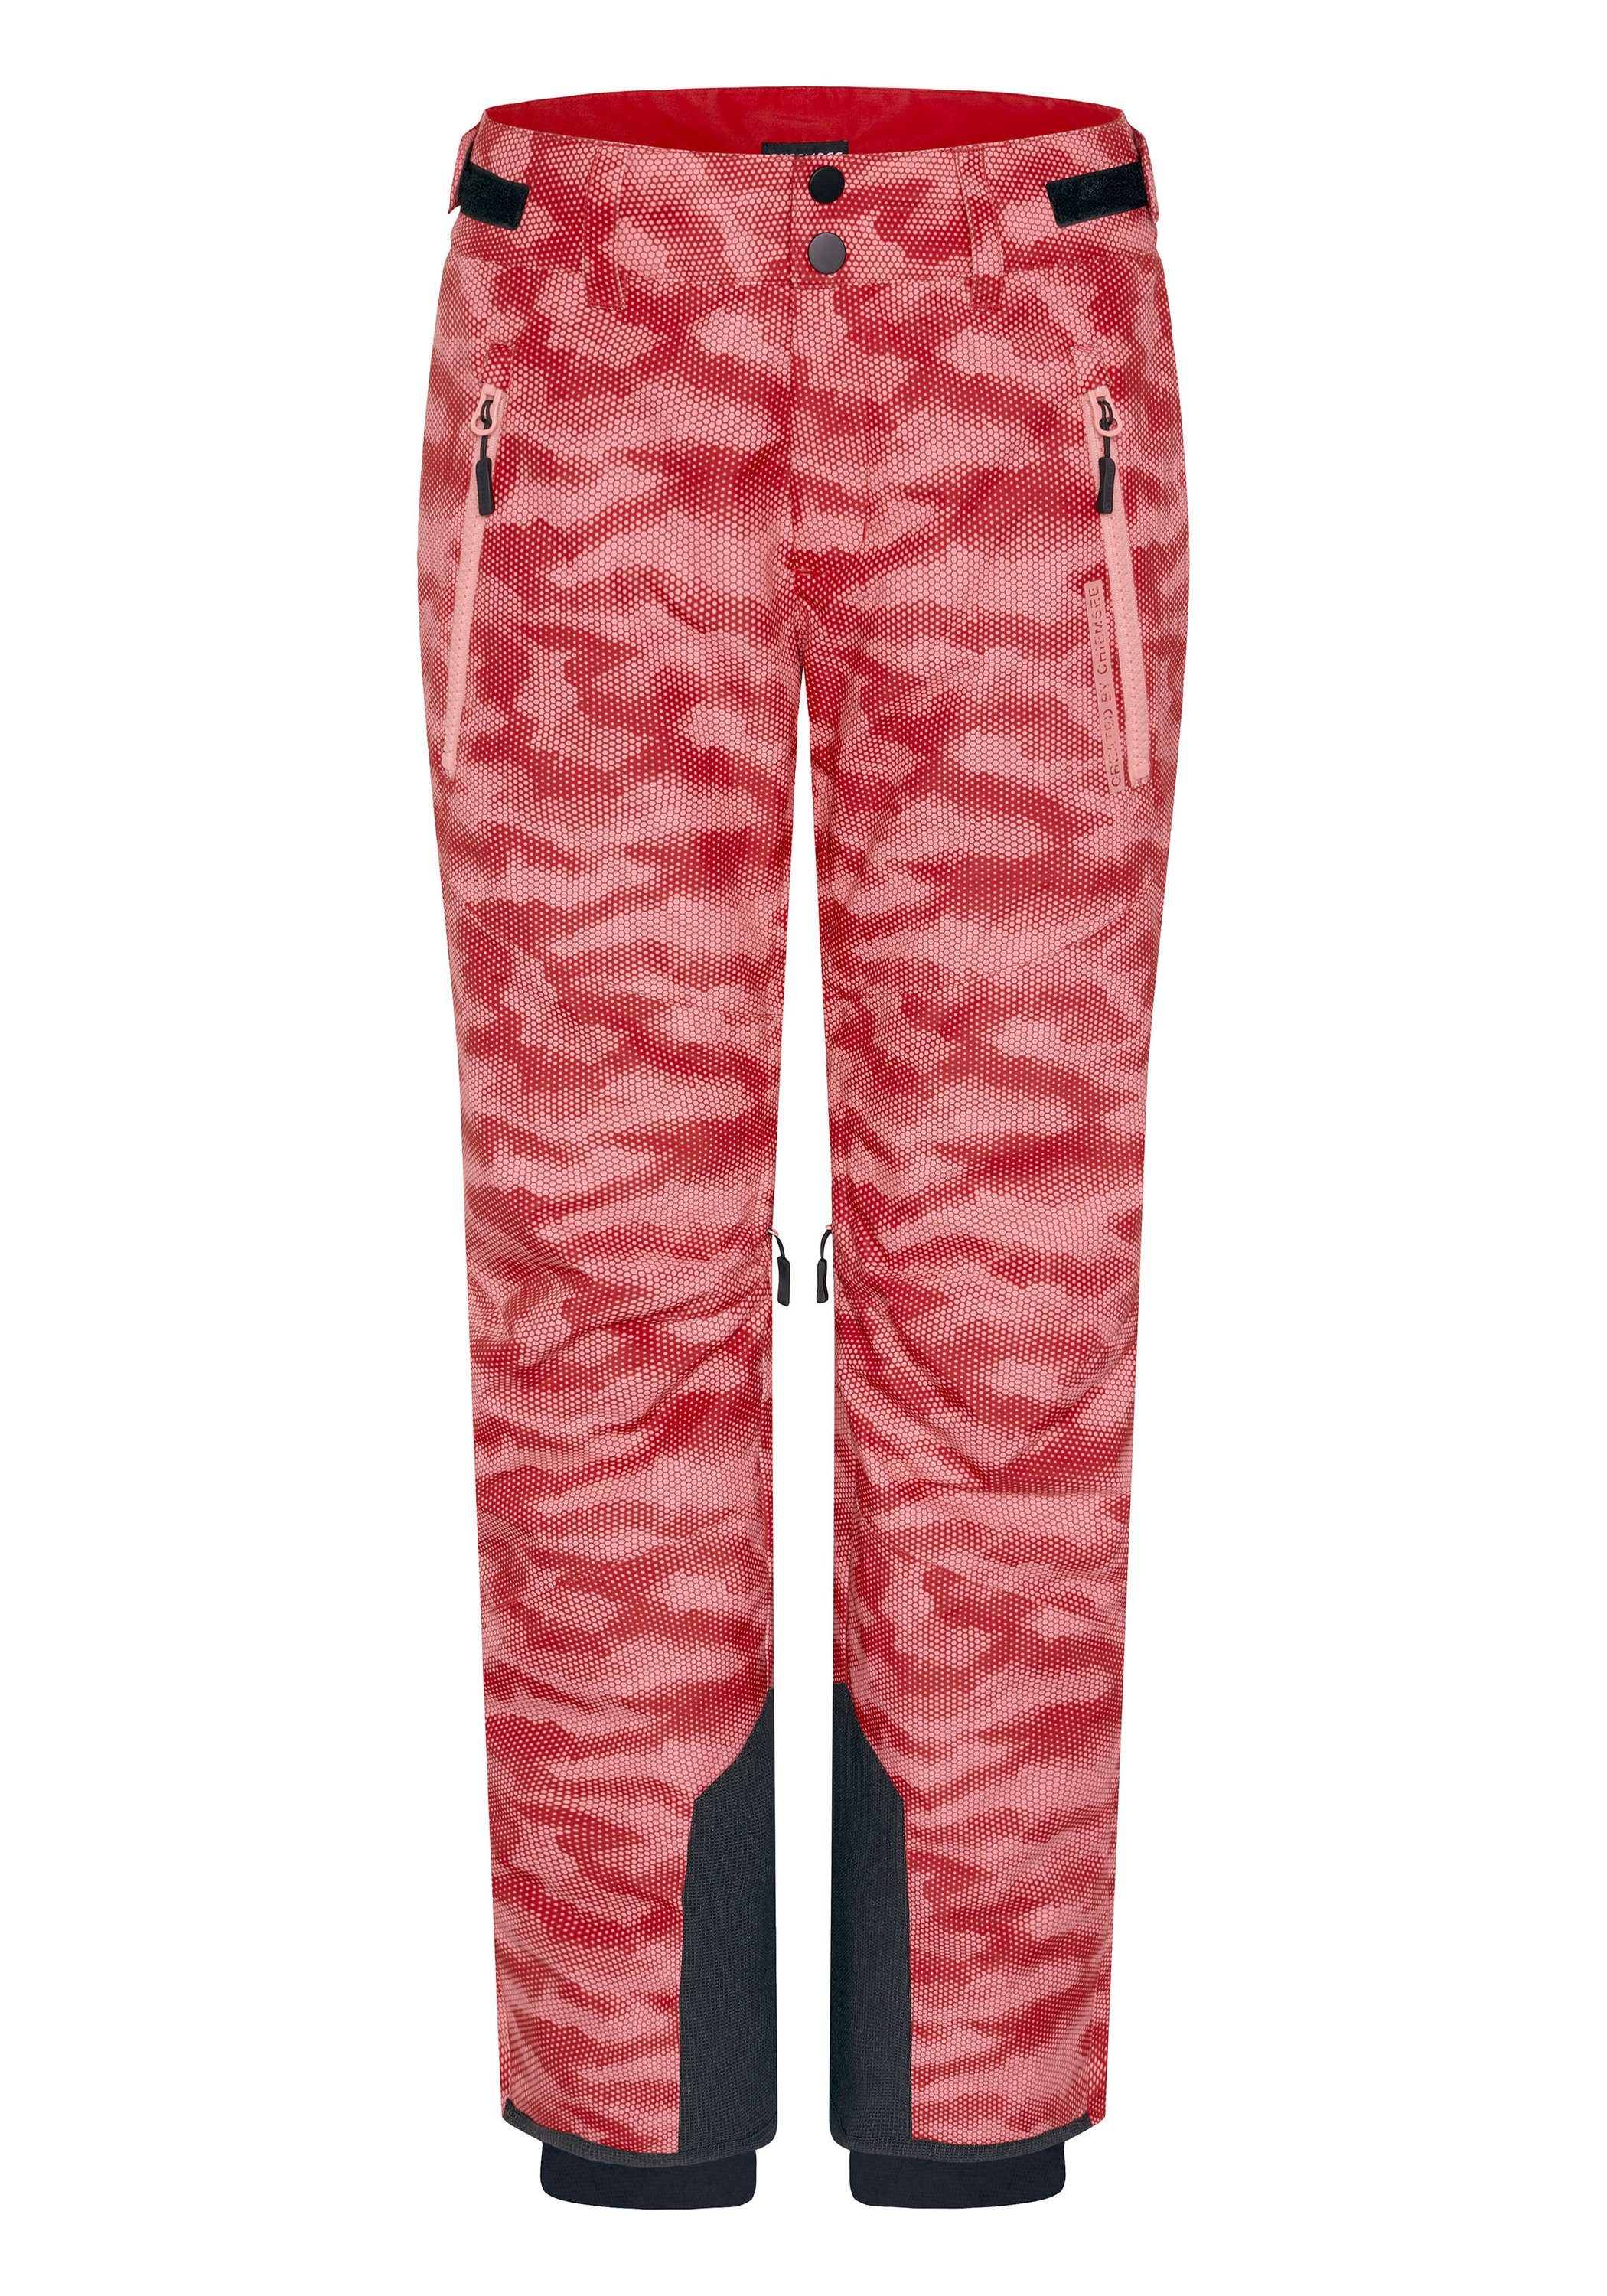 Chiemsee Sporthose Slim-Fit Skihose mit Allover-Muster 1 hell rosa/rosa